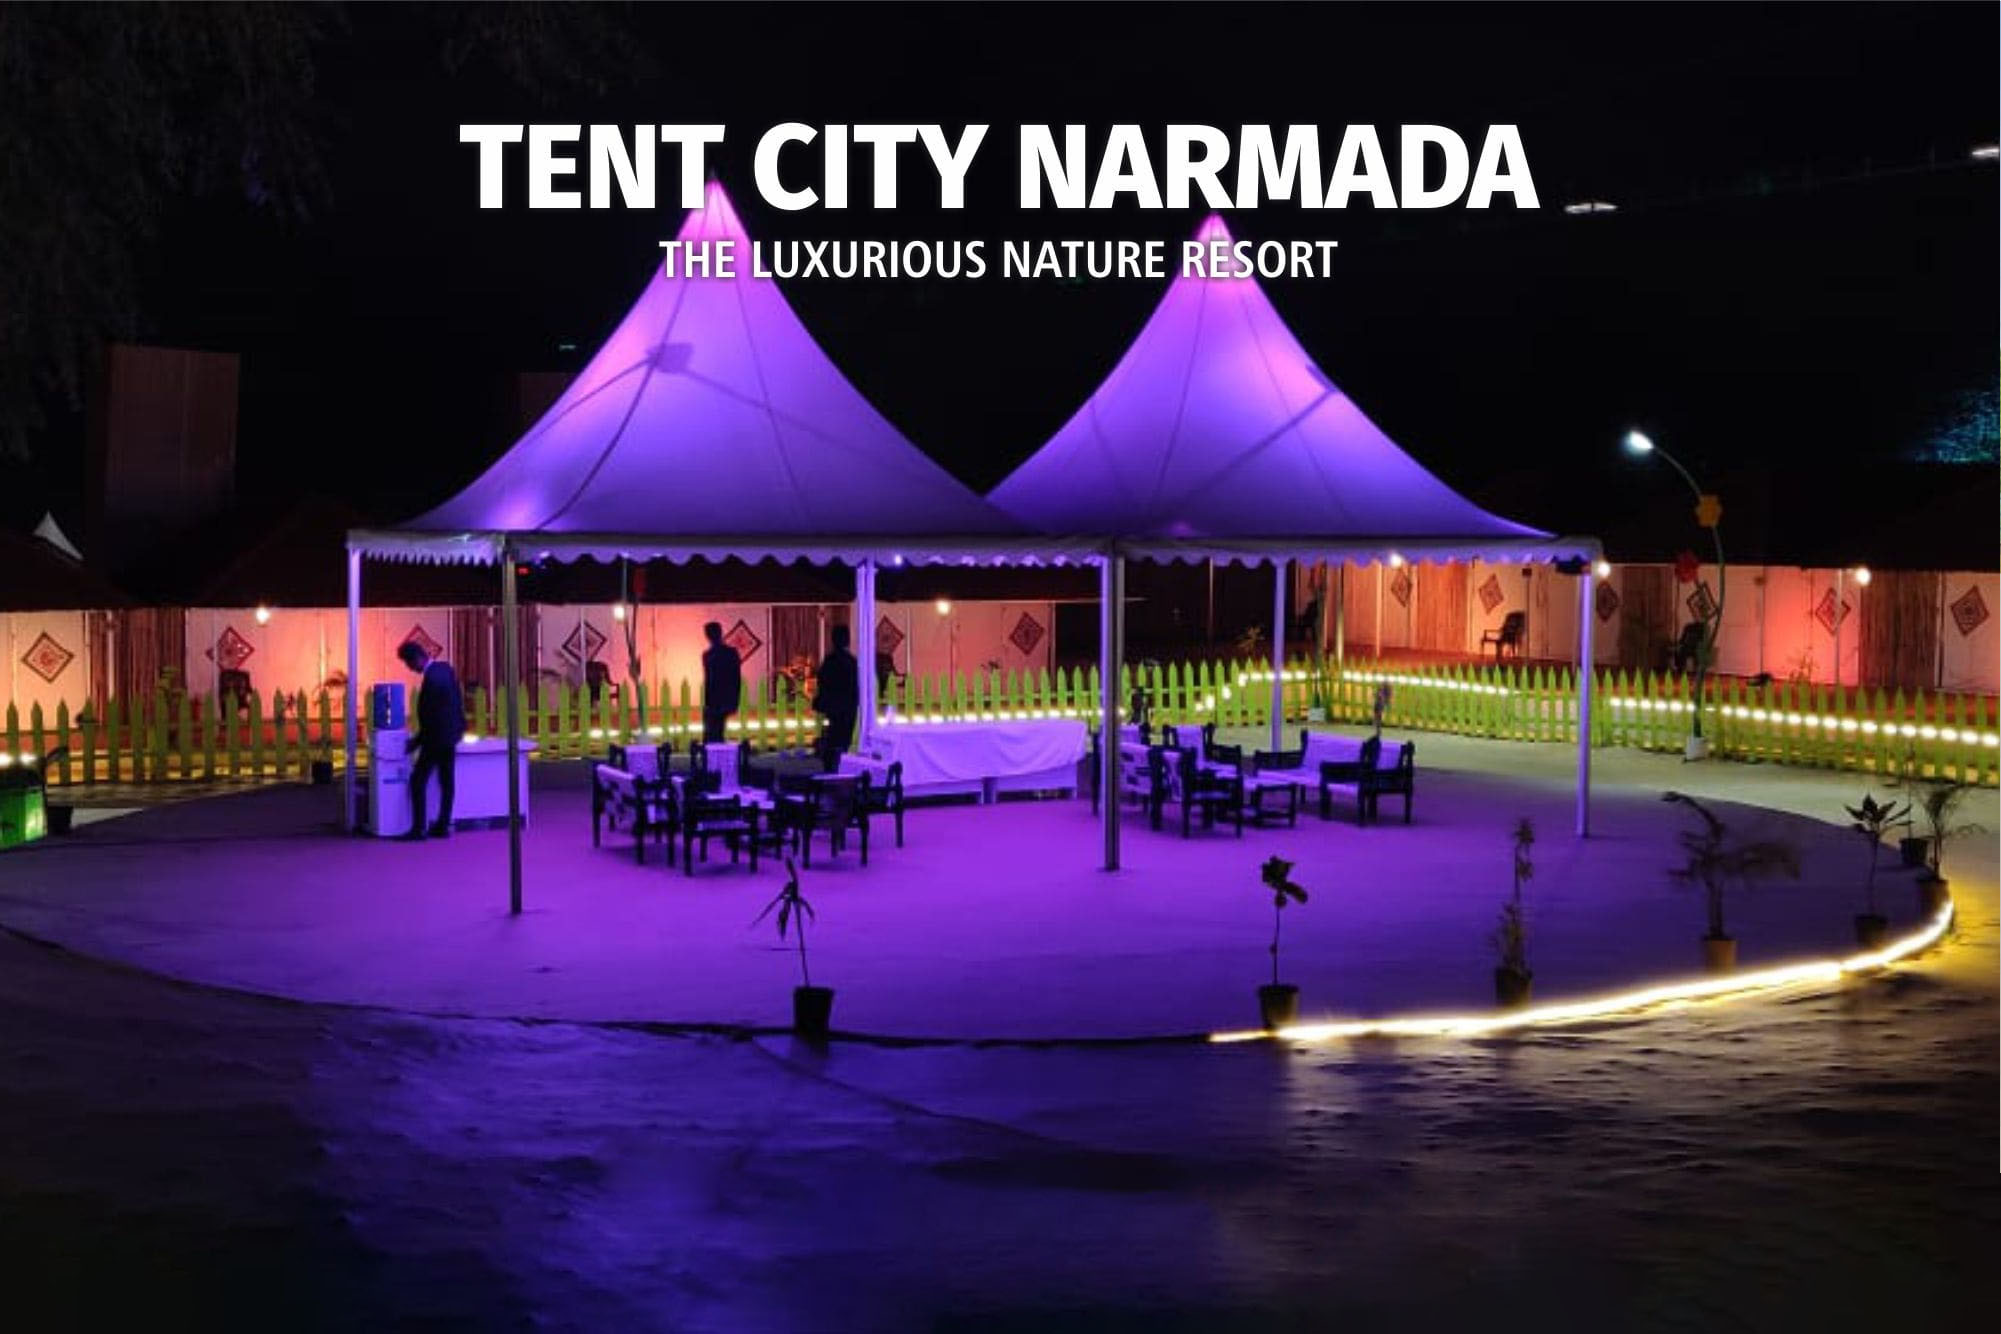 <span  class="uc_style_uc_tiles_grid_image_elementor_uc_items_attribute_title" style="color:#ffffff;">Tent City Narmada Luxurious Resort Night View</span>